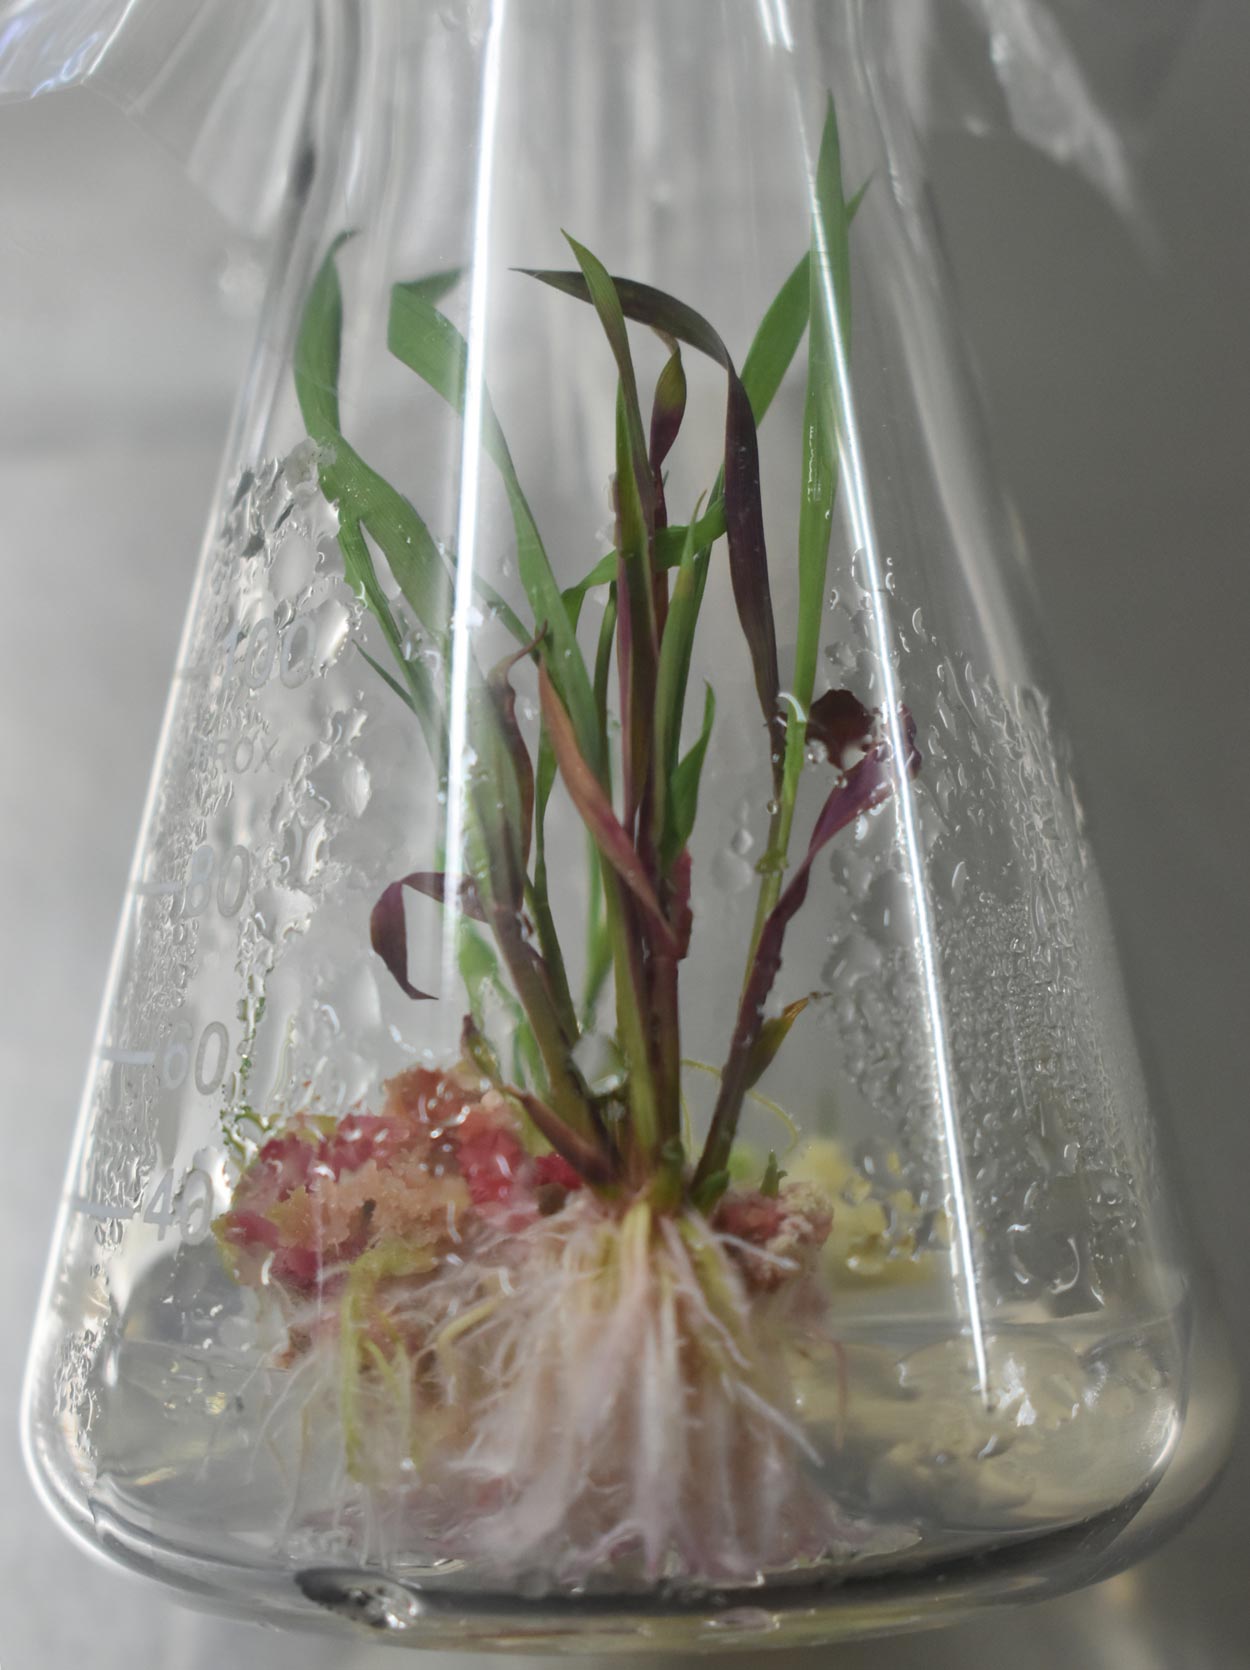 Rice plants integrated with the plant reporter RUBY display signs of redness, reflecting the responses to the hormone known as auxin.